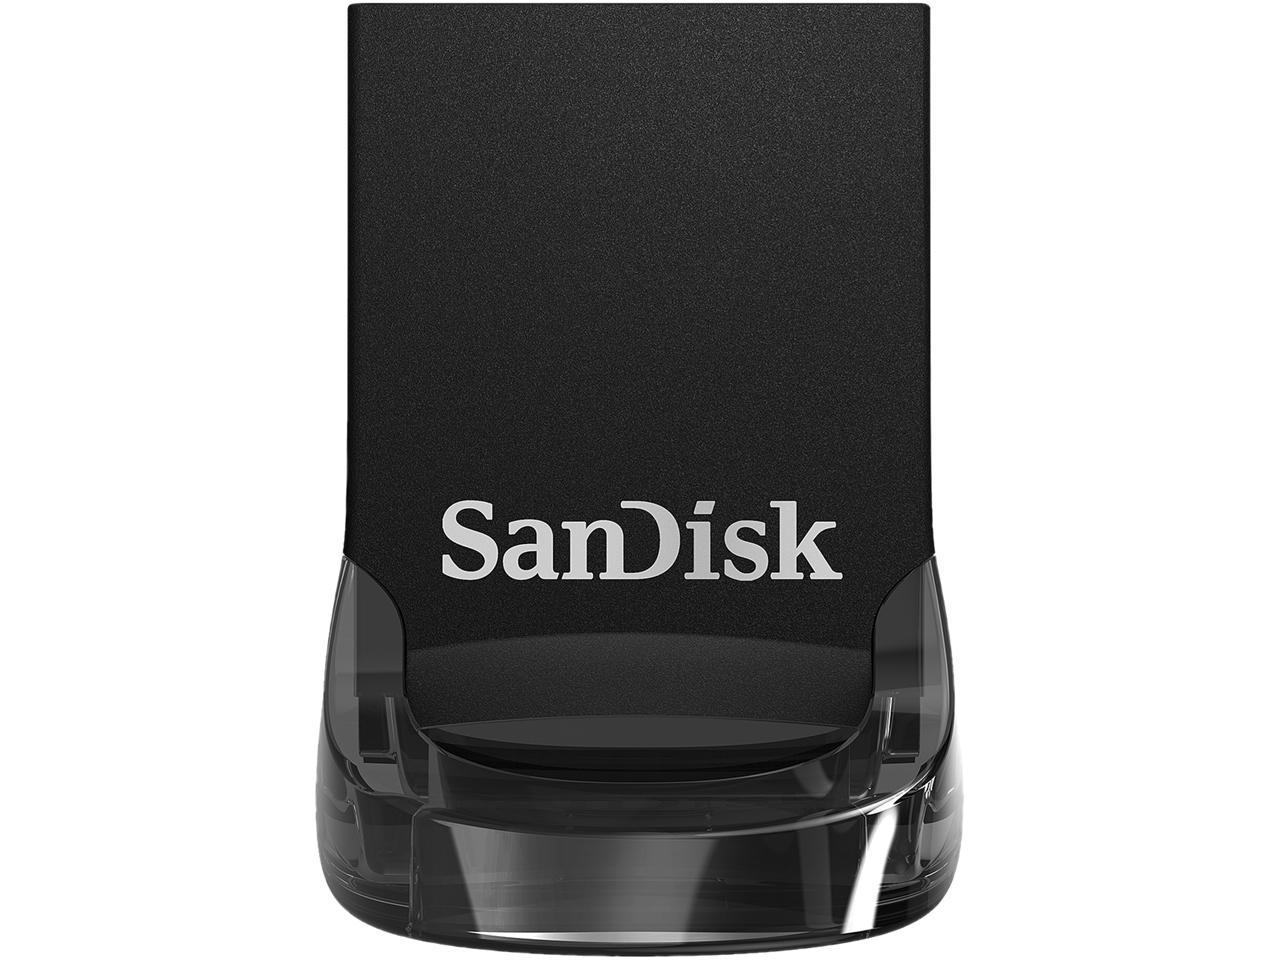 Older Version SDCZ43-064G-G46 SanDisk Ultra Fit CZ43 64GB USB 3.0 Low-Profile Flash Drive Up To 150MB/s Read